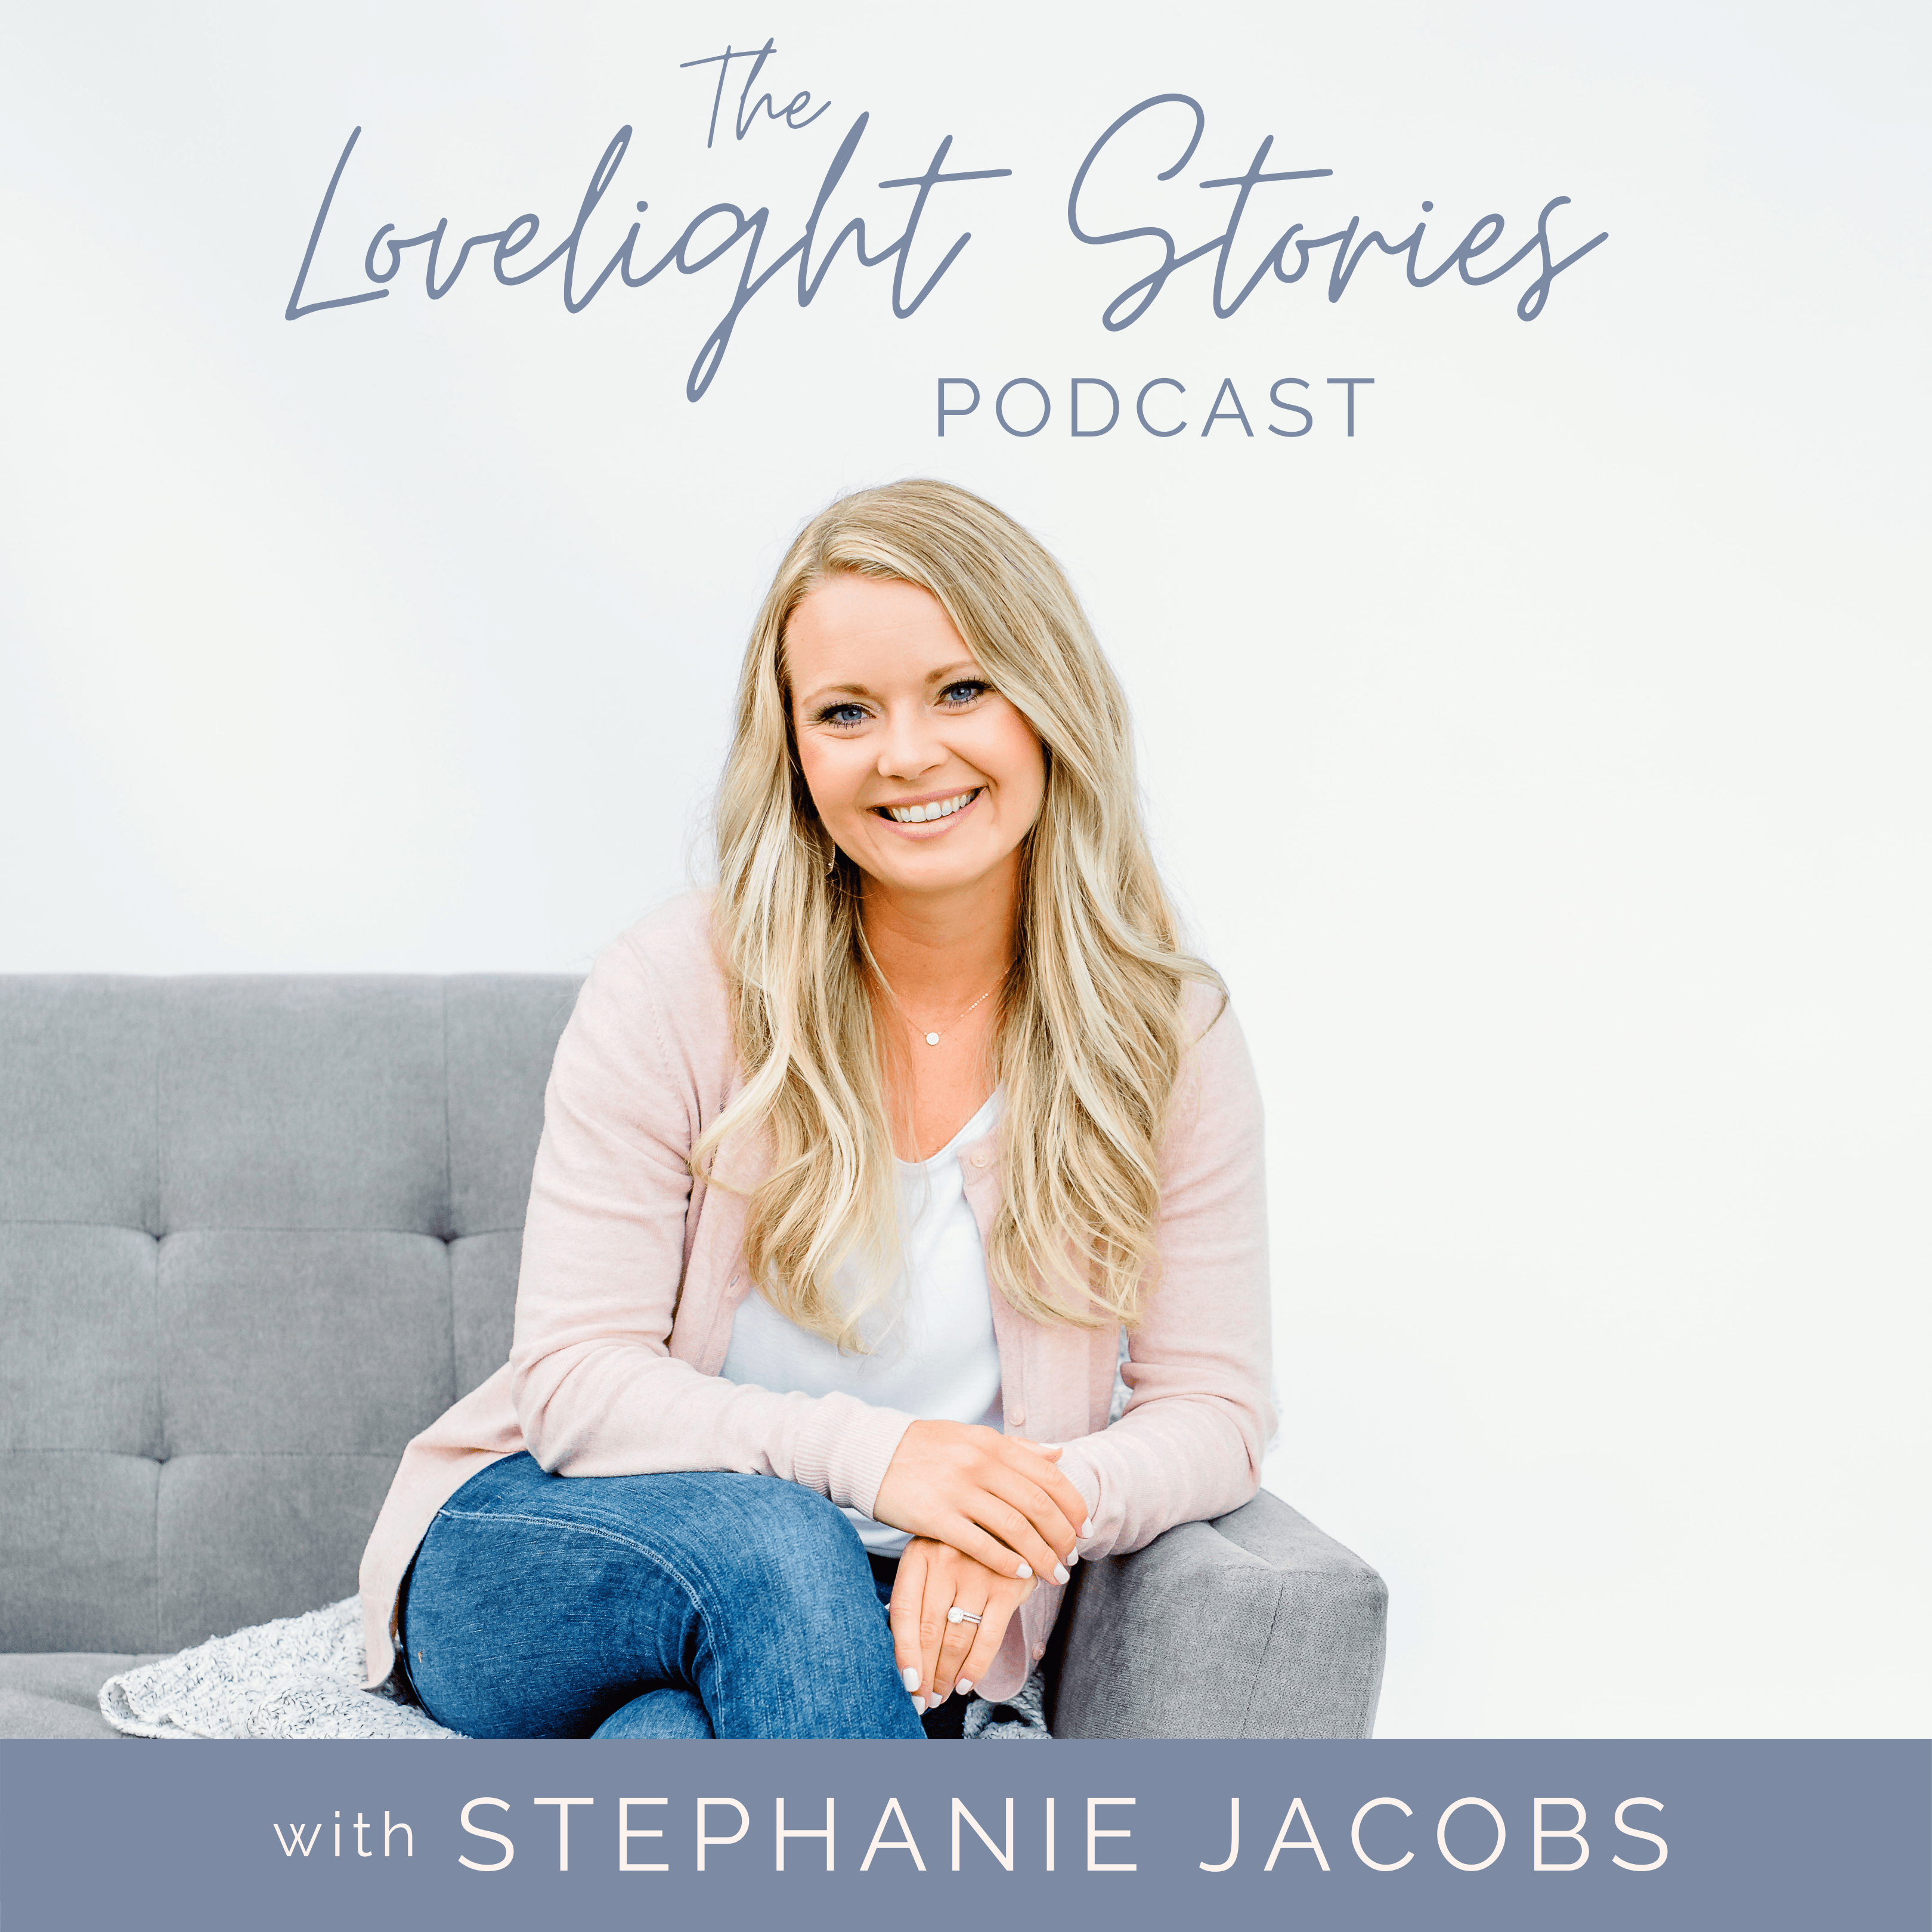 The Lovelight Stories Podcast with Stephanie Jacobs